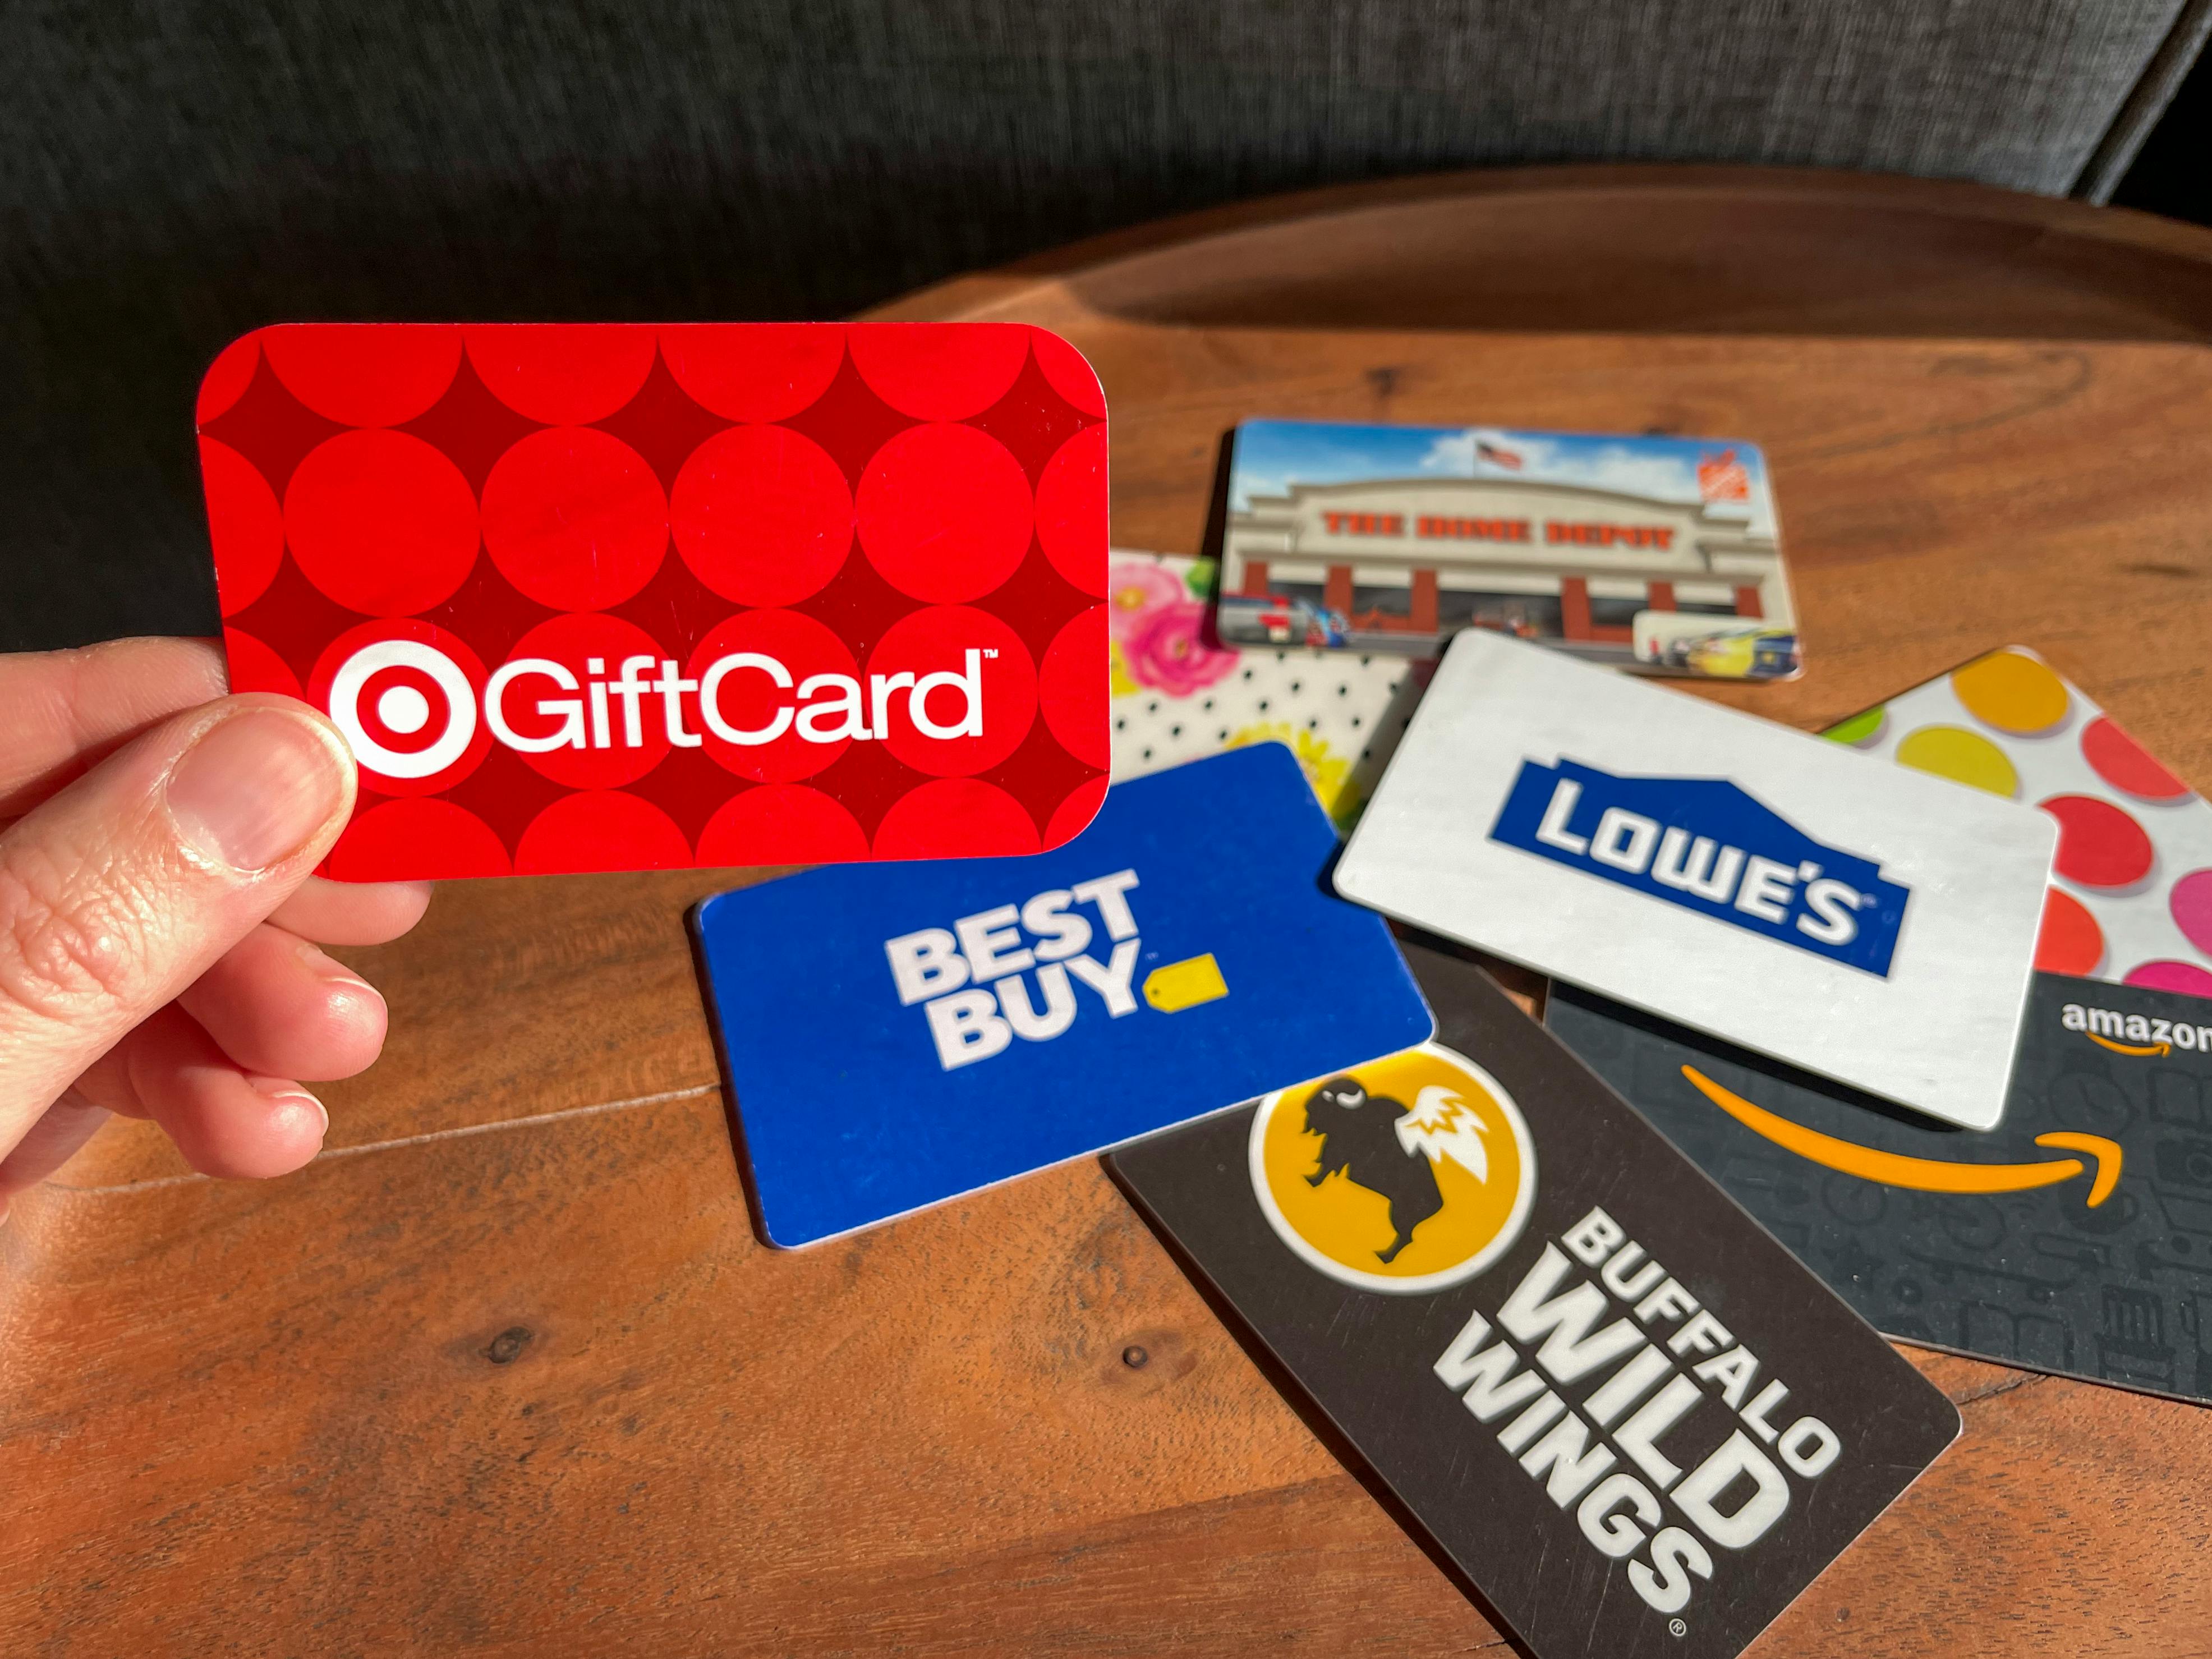 Can You Sell Gift Cards on Ebay?